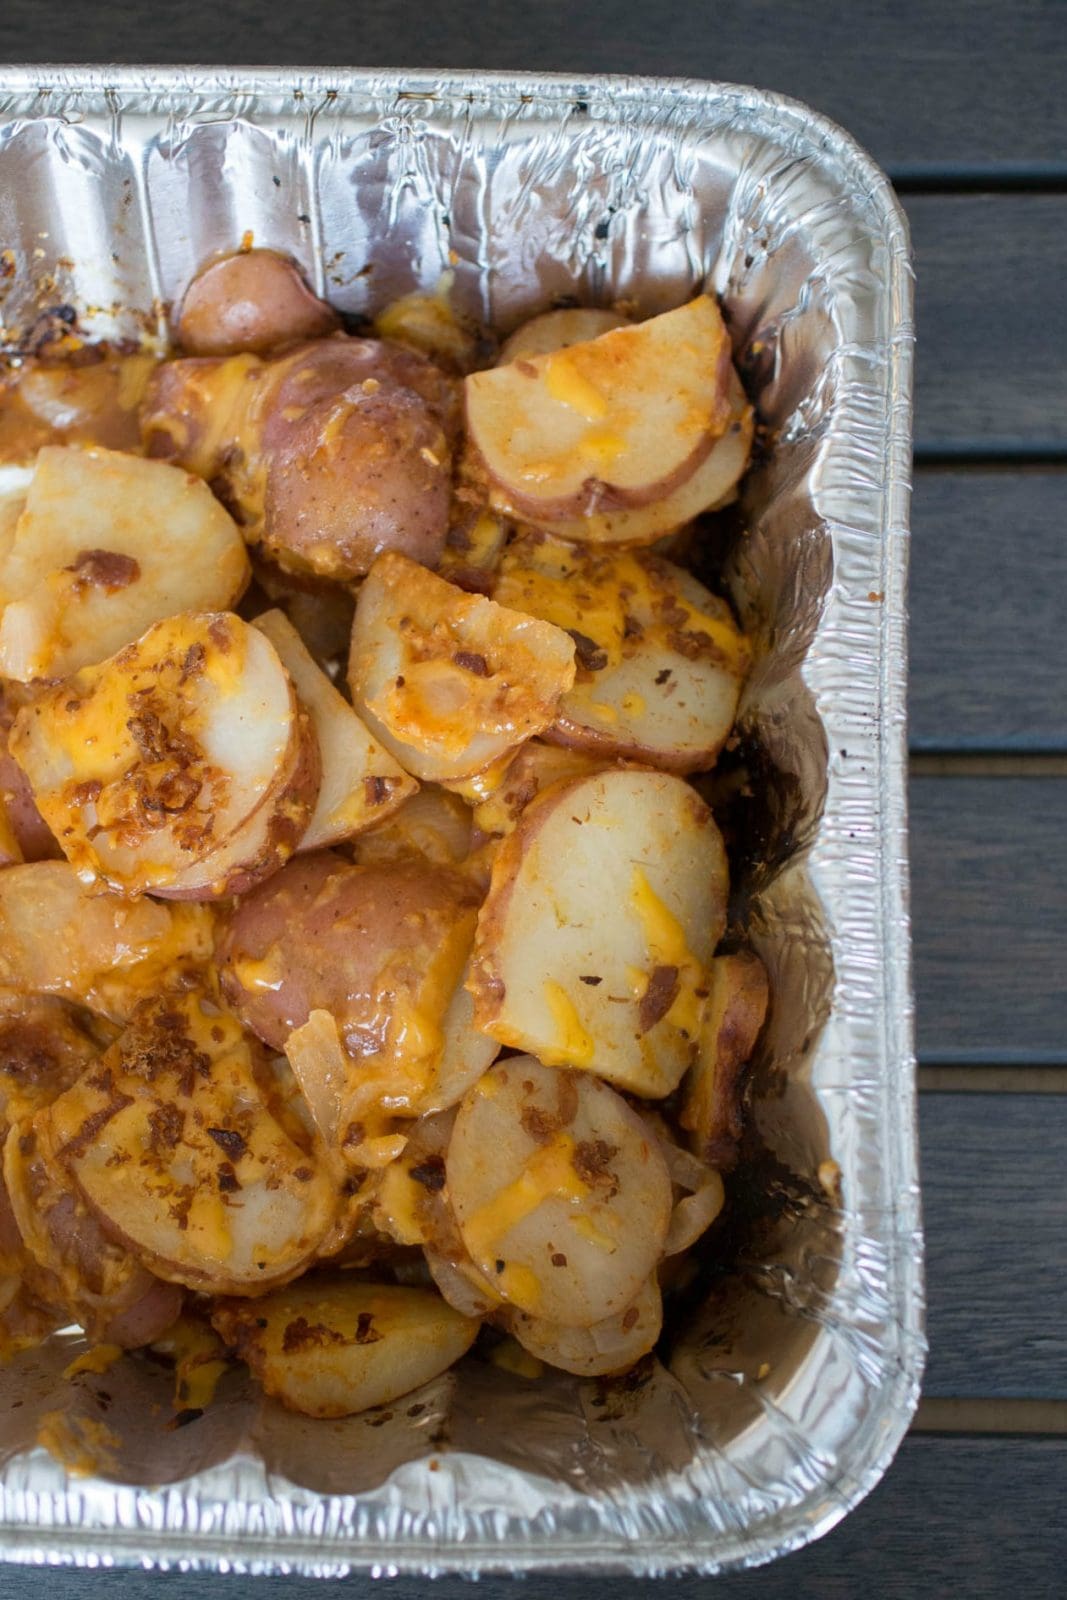 grilled potatoes in foil roasting pan after cooking on the grill